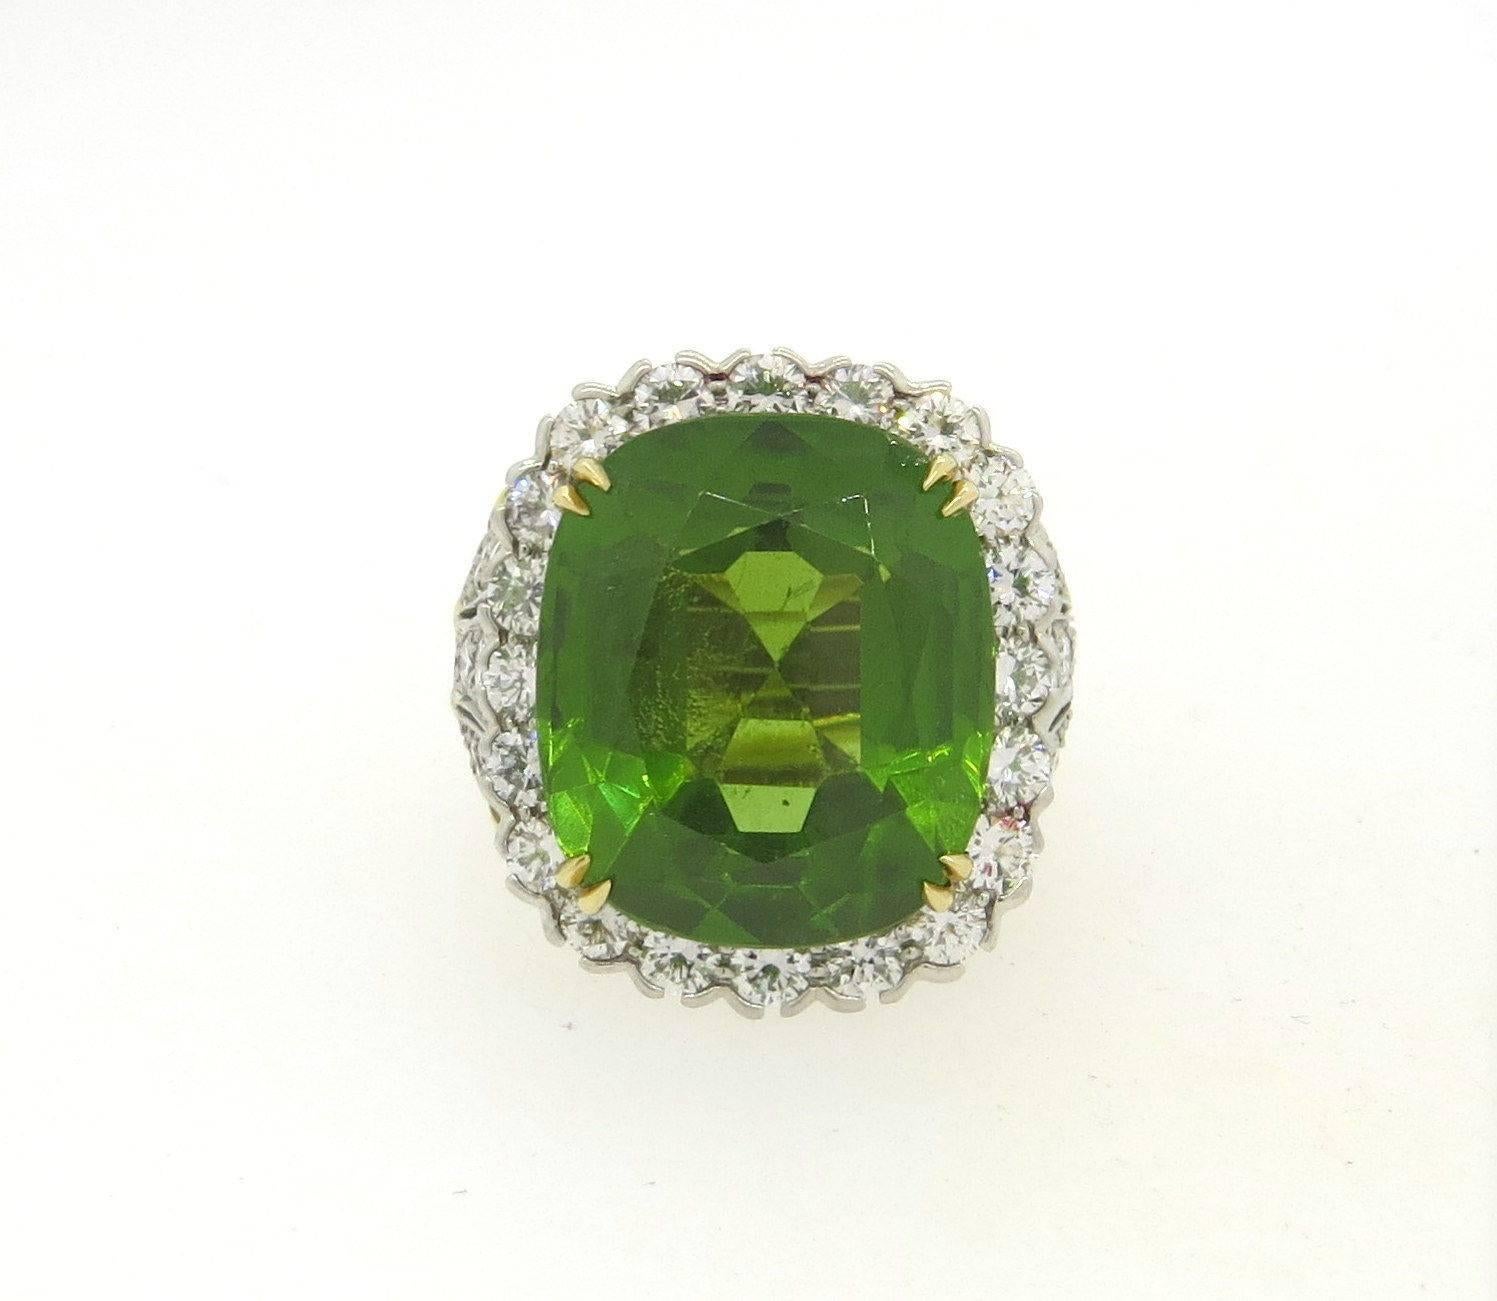 An 18k yellow gold and platinum ring set with a 25.28ct peridot and 3.71ctw of G/VS diamonds.  Crafted by David Webb, the ring is a size 6 1/4, ring top is 25mm x 22mm, sits approx. 12mm from the finger.   Marked: David Webb 900pt, 18k.  The weight